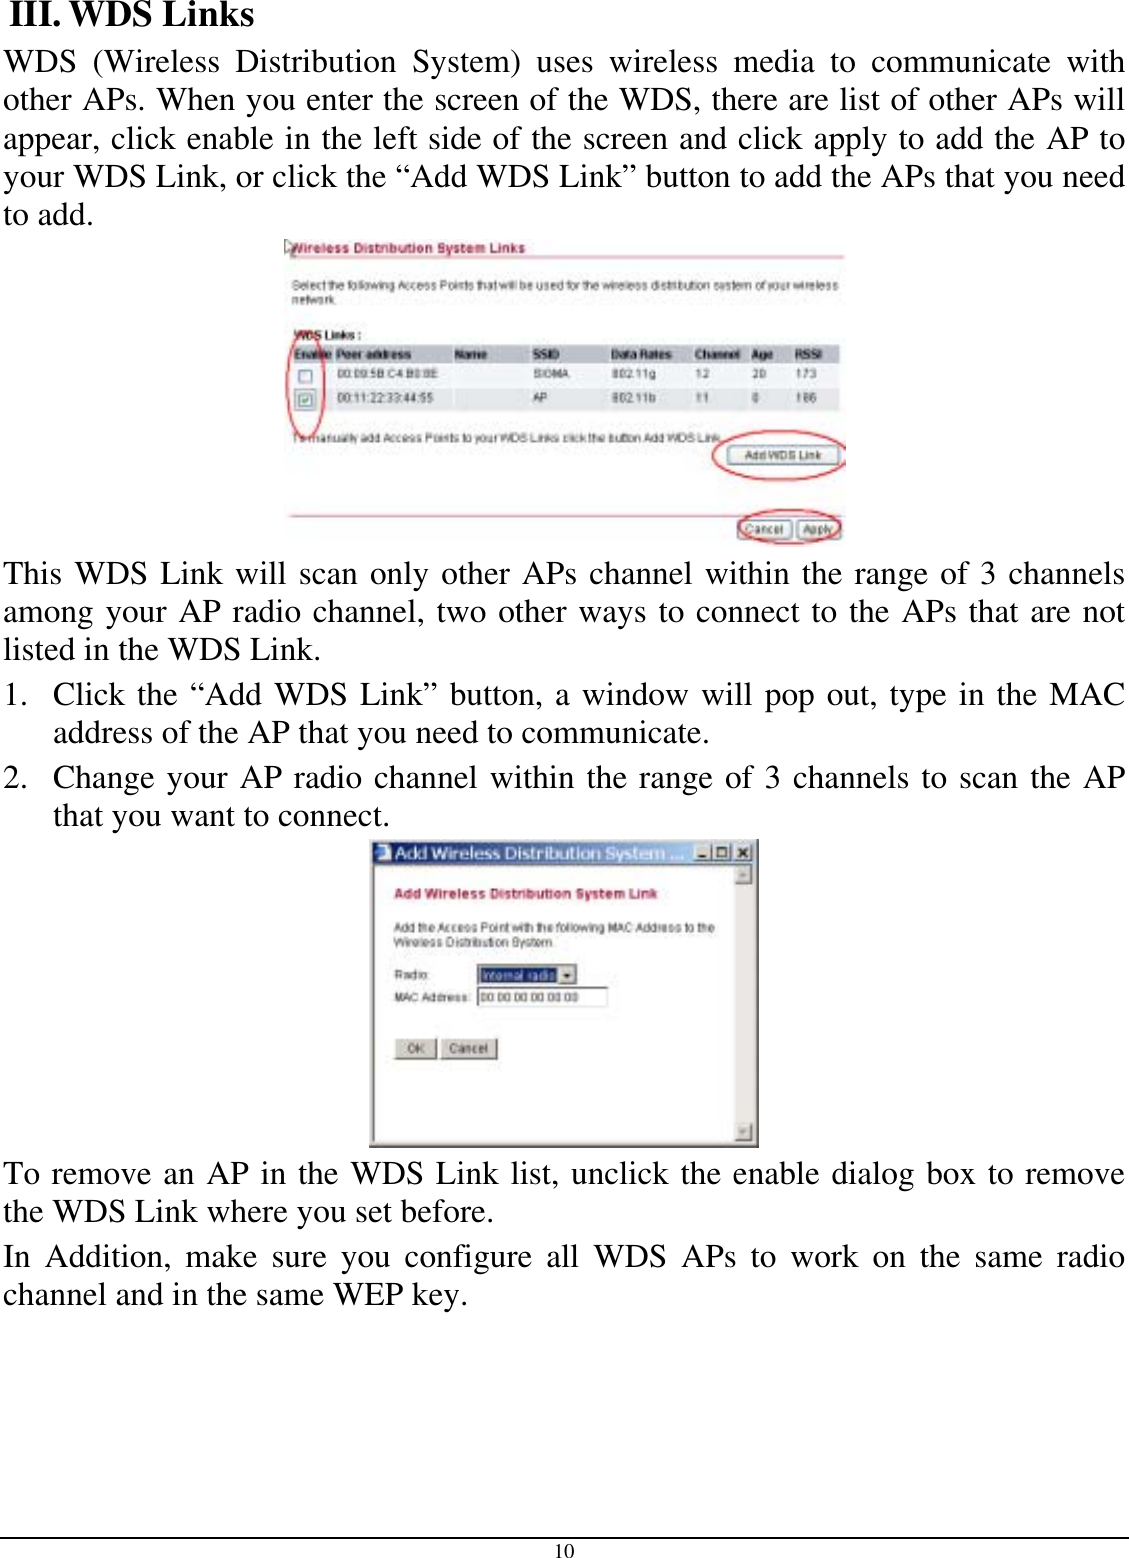  10 III. WDS Links WDS (Wireless Distribution System) uses wireless media to communicate with other APs. When you enter the screen of the WDS, there are list of other APs will appear, click enable in the left side of the screen and click apply to add the AP to your WDS Link, or click the “Add WDS Link” button to add the APs that you need to add.  This WDS Link will scan only other APs channel within the range of 3 channels among your AP radio channel, two other ways to connect to the APs that are not listed in the WDS Link.  1.  Click the “Add WDS Link” button, a window will pop out, type in the MAC address of the AP that you need to communicate. 2.  Change your AP radio channel within the range of 3 channels to scan the AP that you want to connect.  To remove an AP in the WDS Link list, unclick the enable dialog box to remove the WDS Link where you set before. In Addition, make sure you configure all WDS APs to work on the same radio channel and in the same WEP key. 